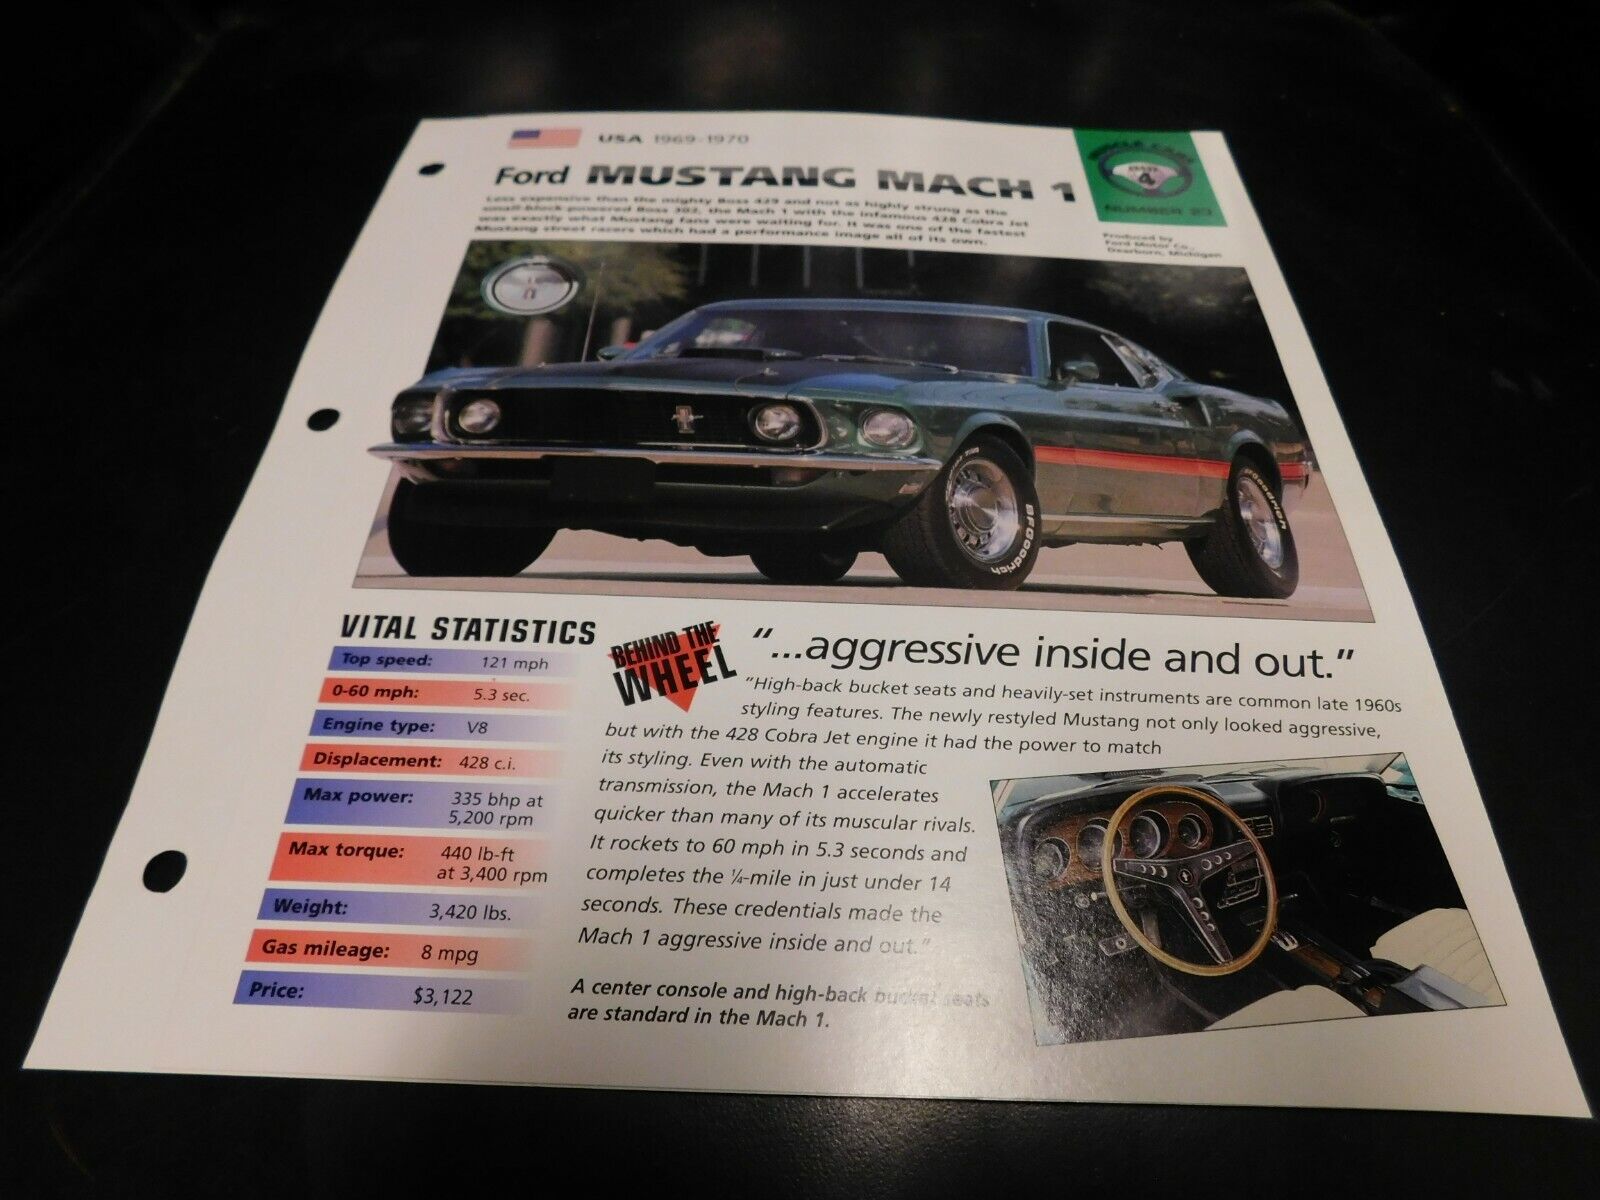 1969-1970 Ford Mustang Mach 1 Spec Sheet Brochure Photo Poster